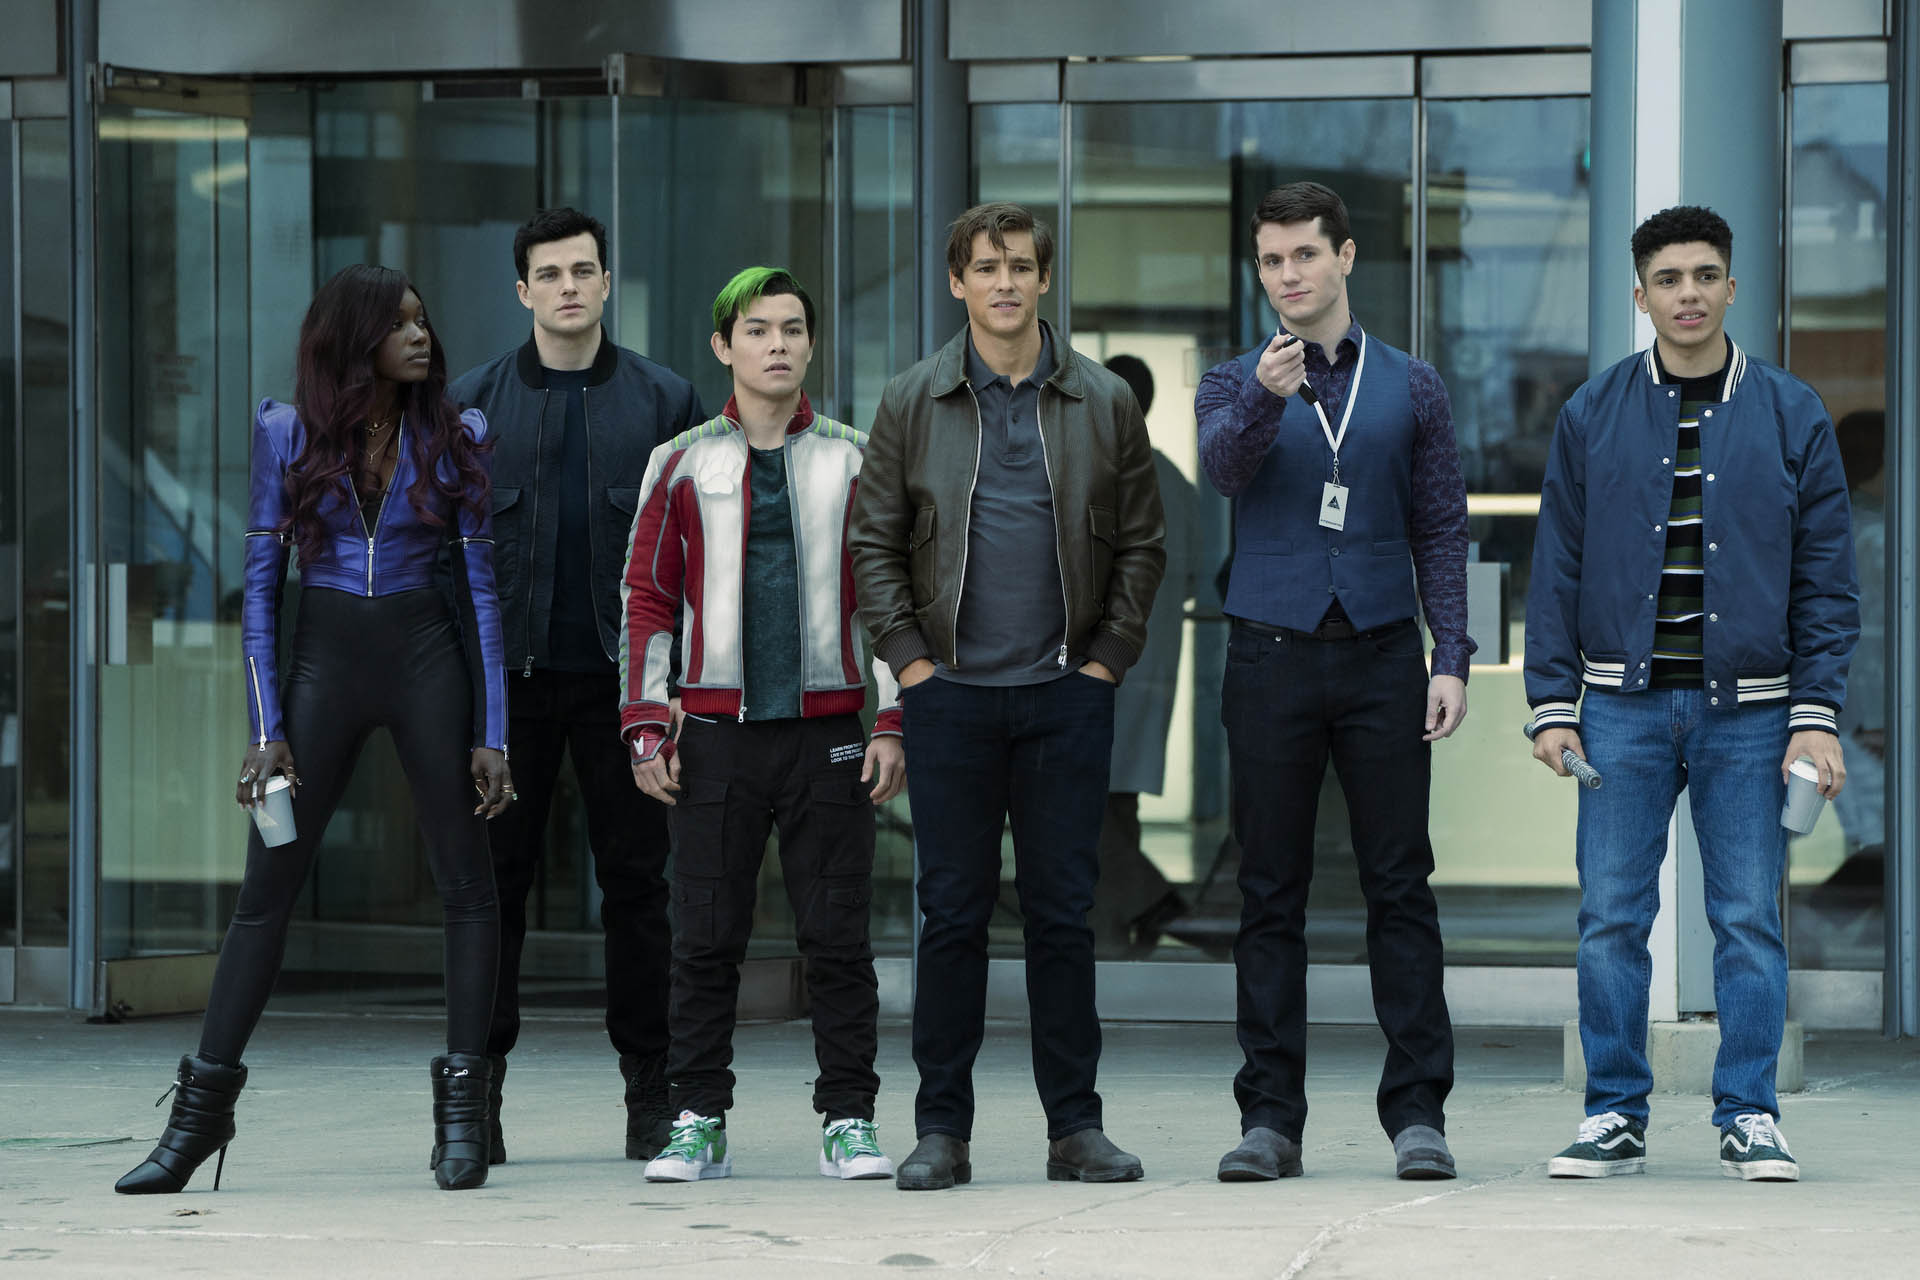 Anna Diop, Joshua Orpin, Ryan Potter, Brenton Thwaites, James Scully, Jay Lycurgo in Titans 4x01 [tag: Anna Diop, Joshua Orpin, Ryan Potter, Brenton Thwaites, James Scully, Jay Lycurgo] [credit: courtesy of HBO Max/Warner Bros. Discovery]